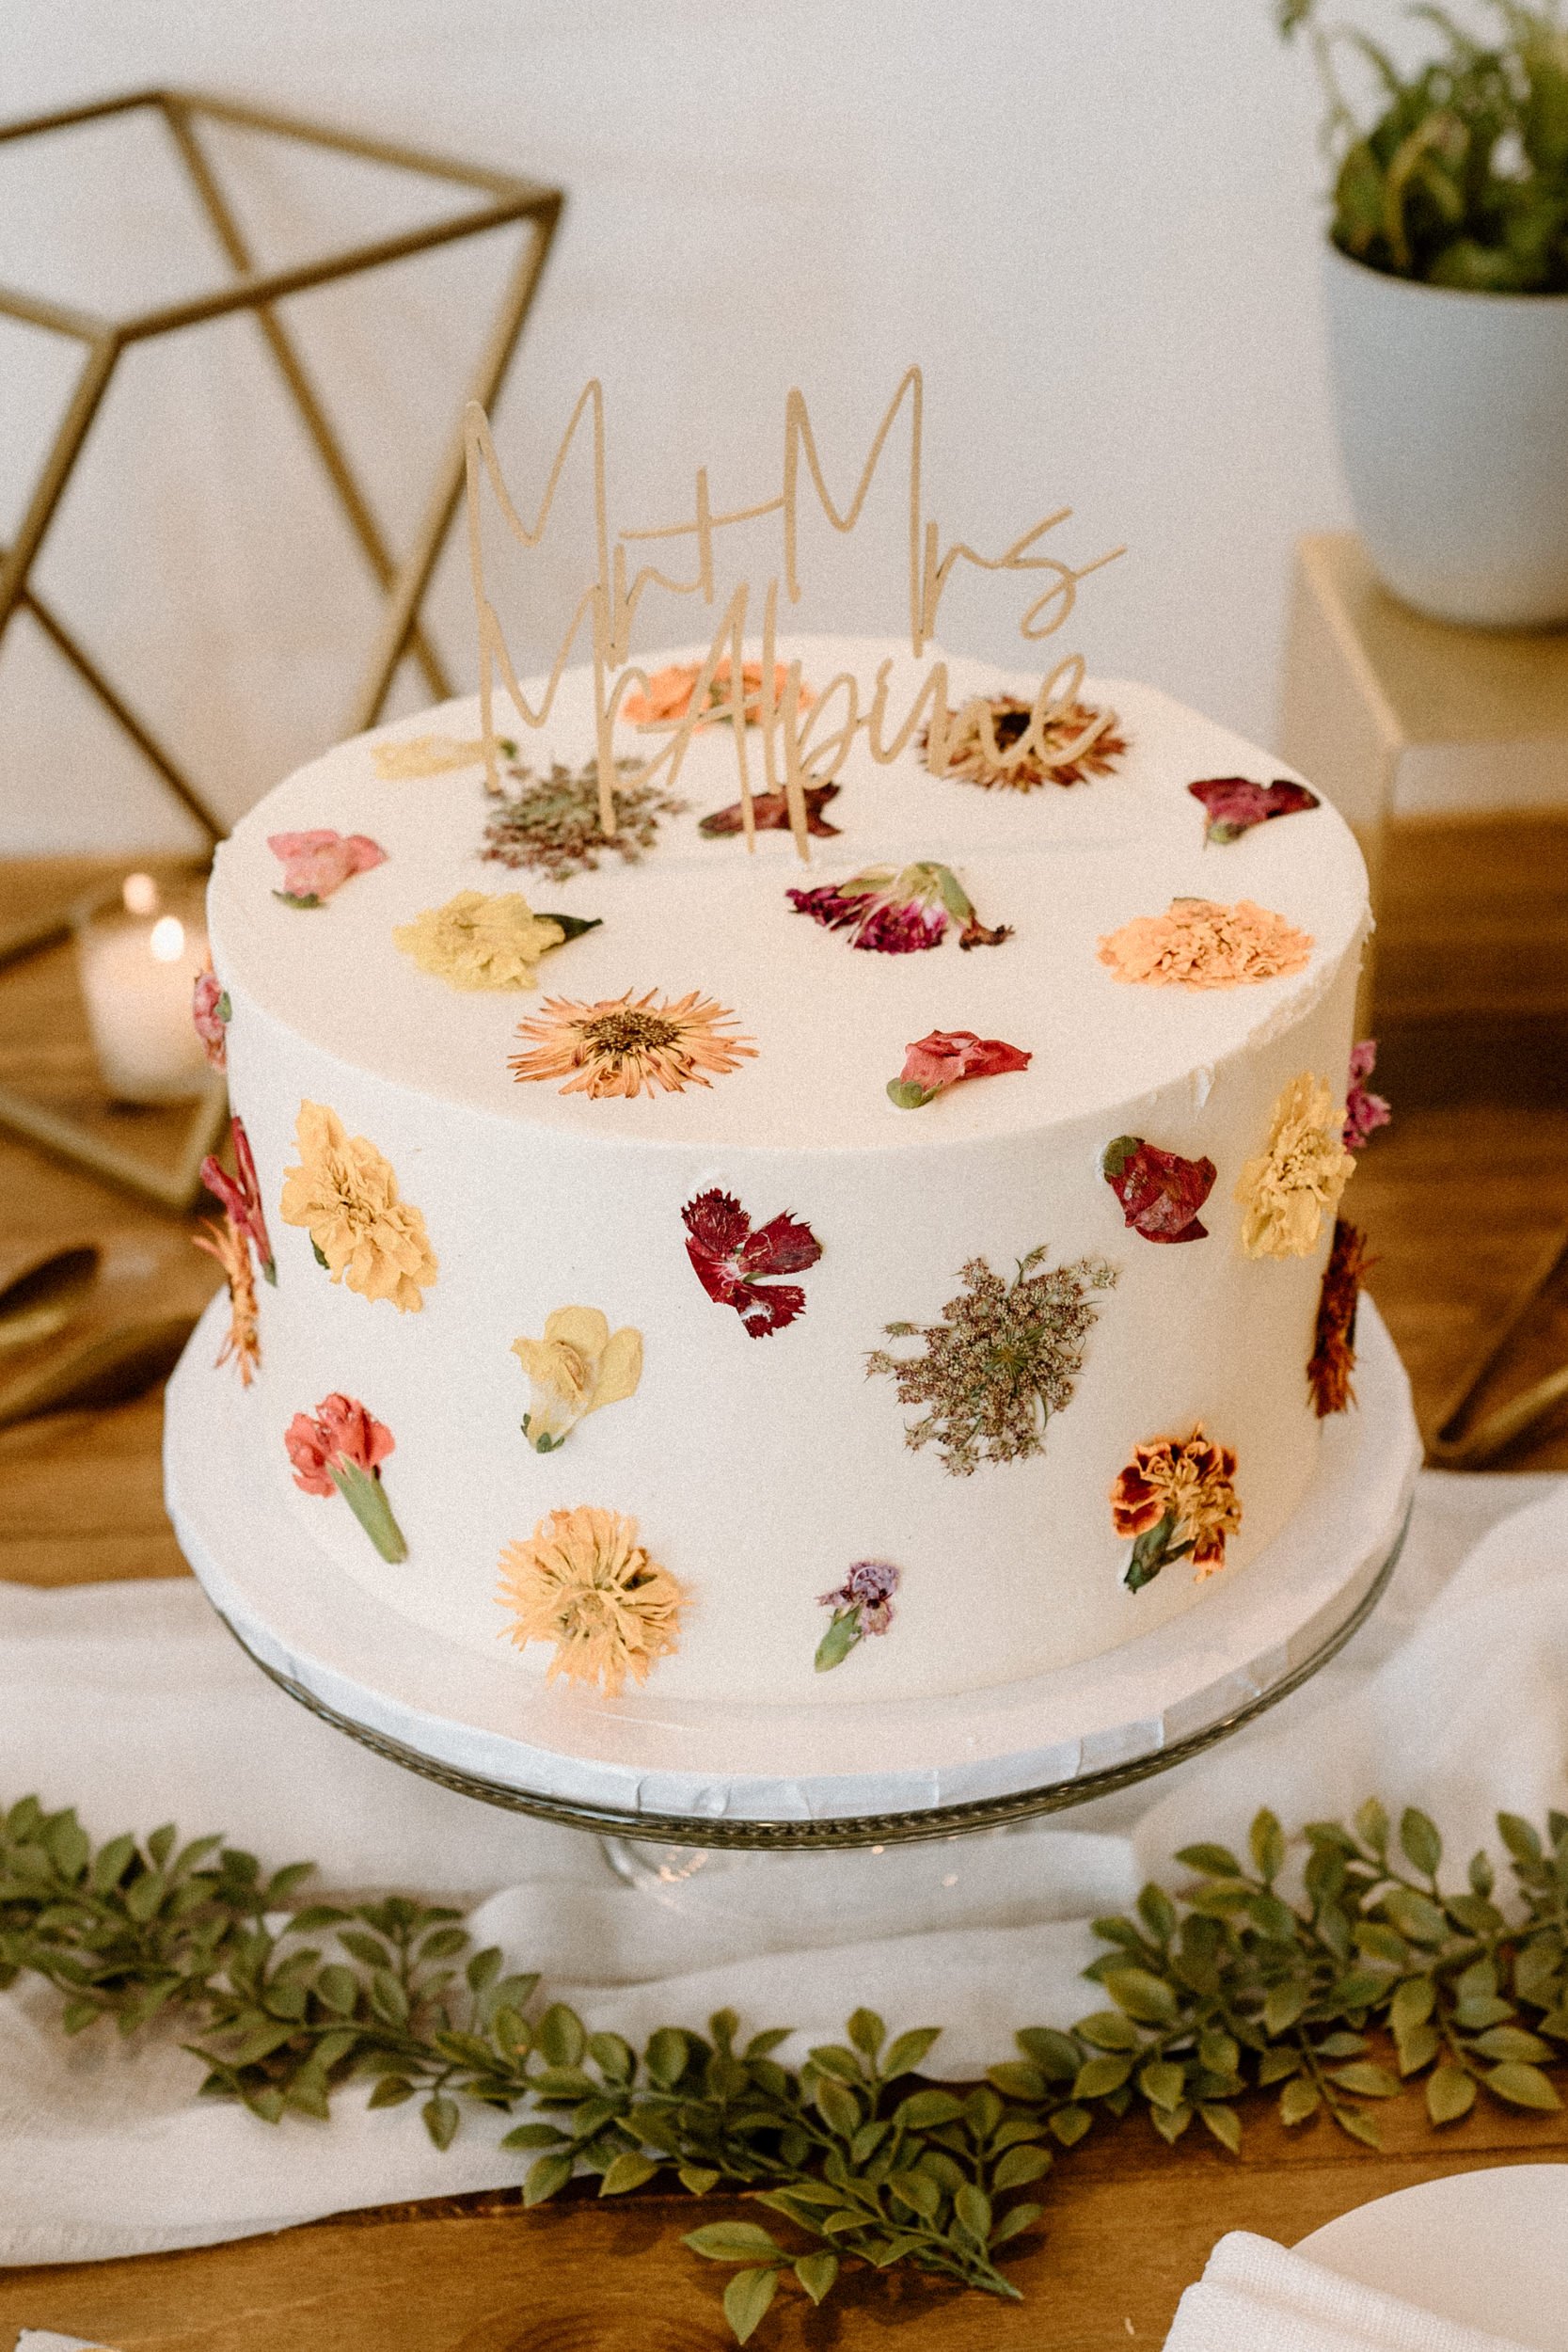 A white wedding cake decorated with colorful flower petals